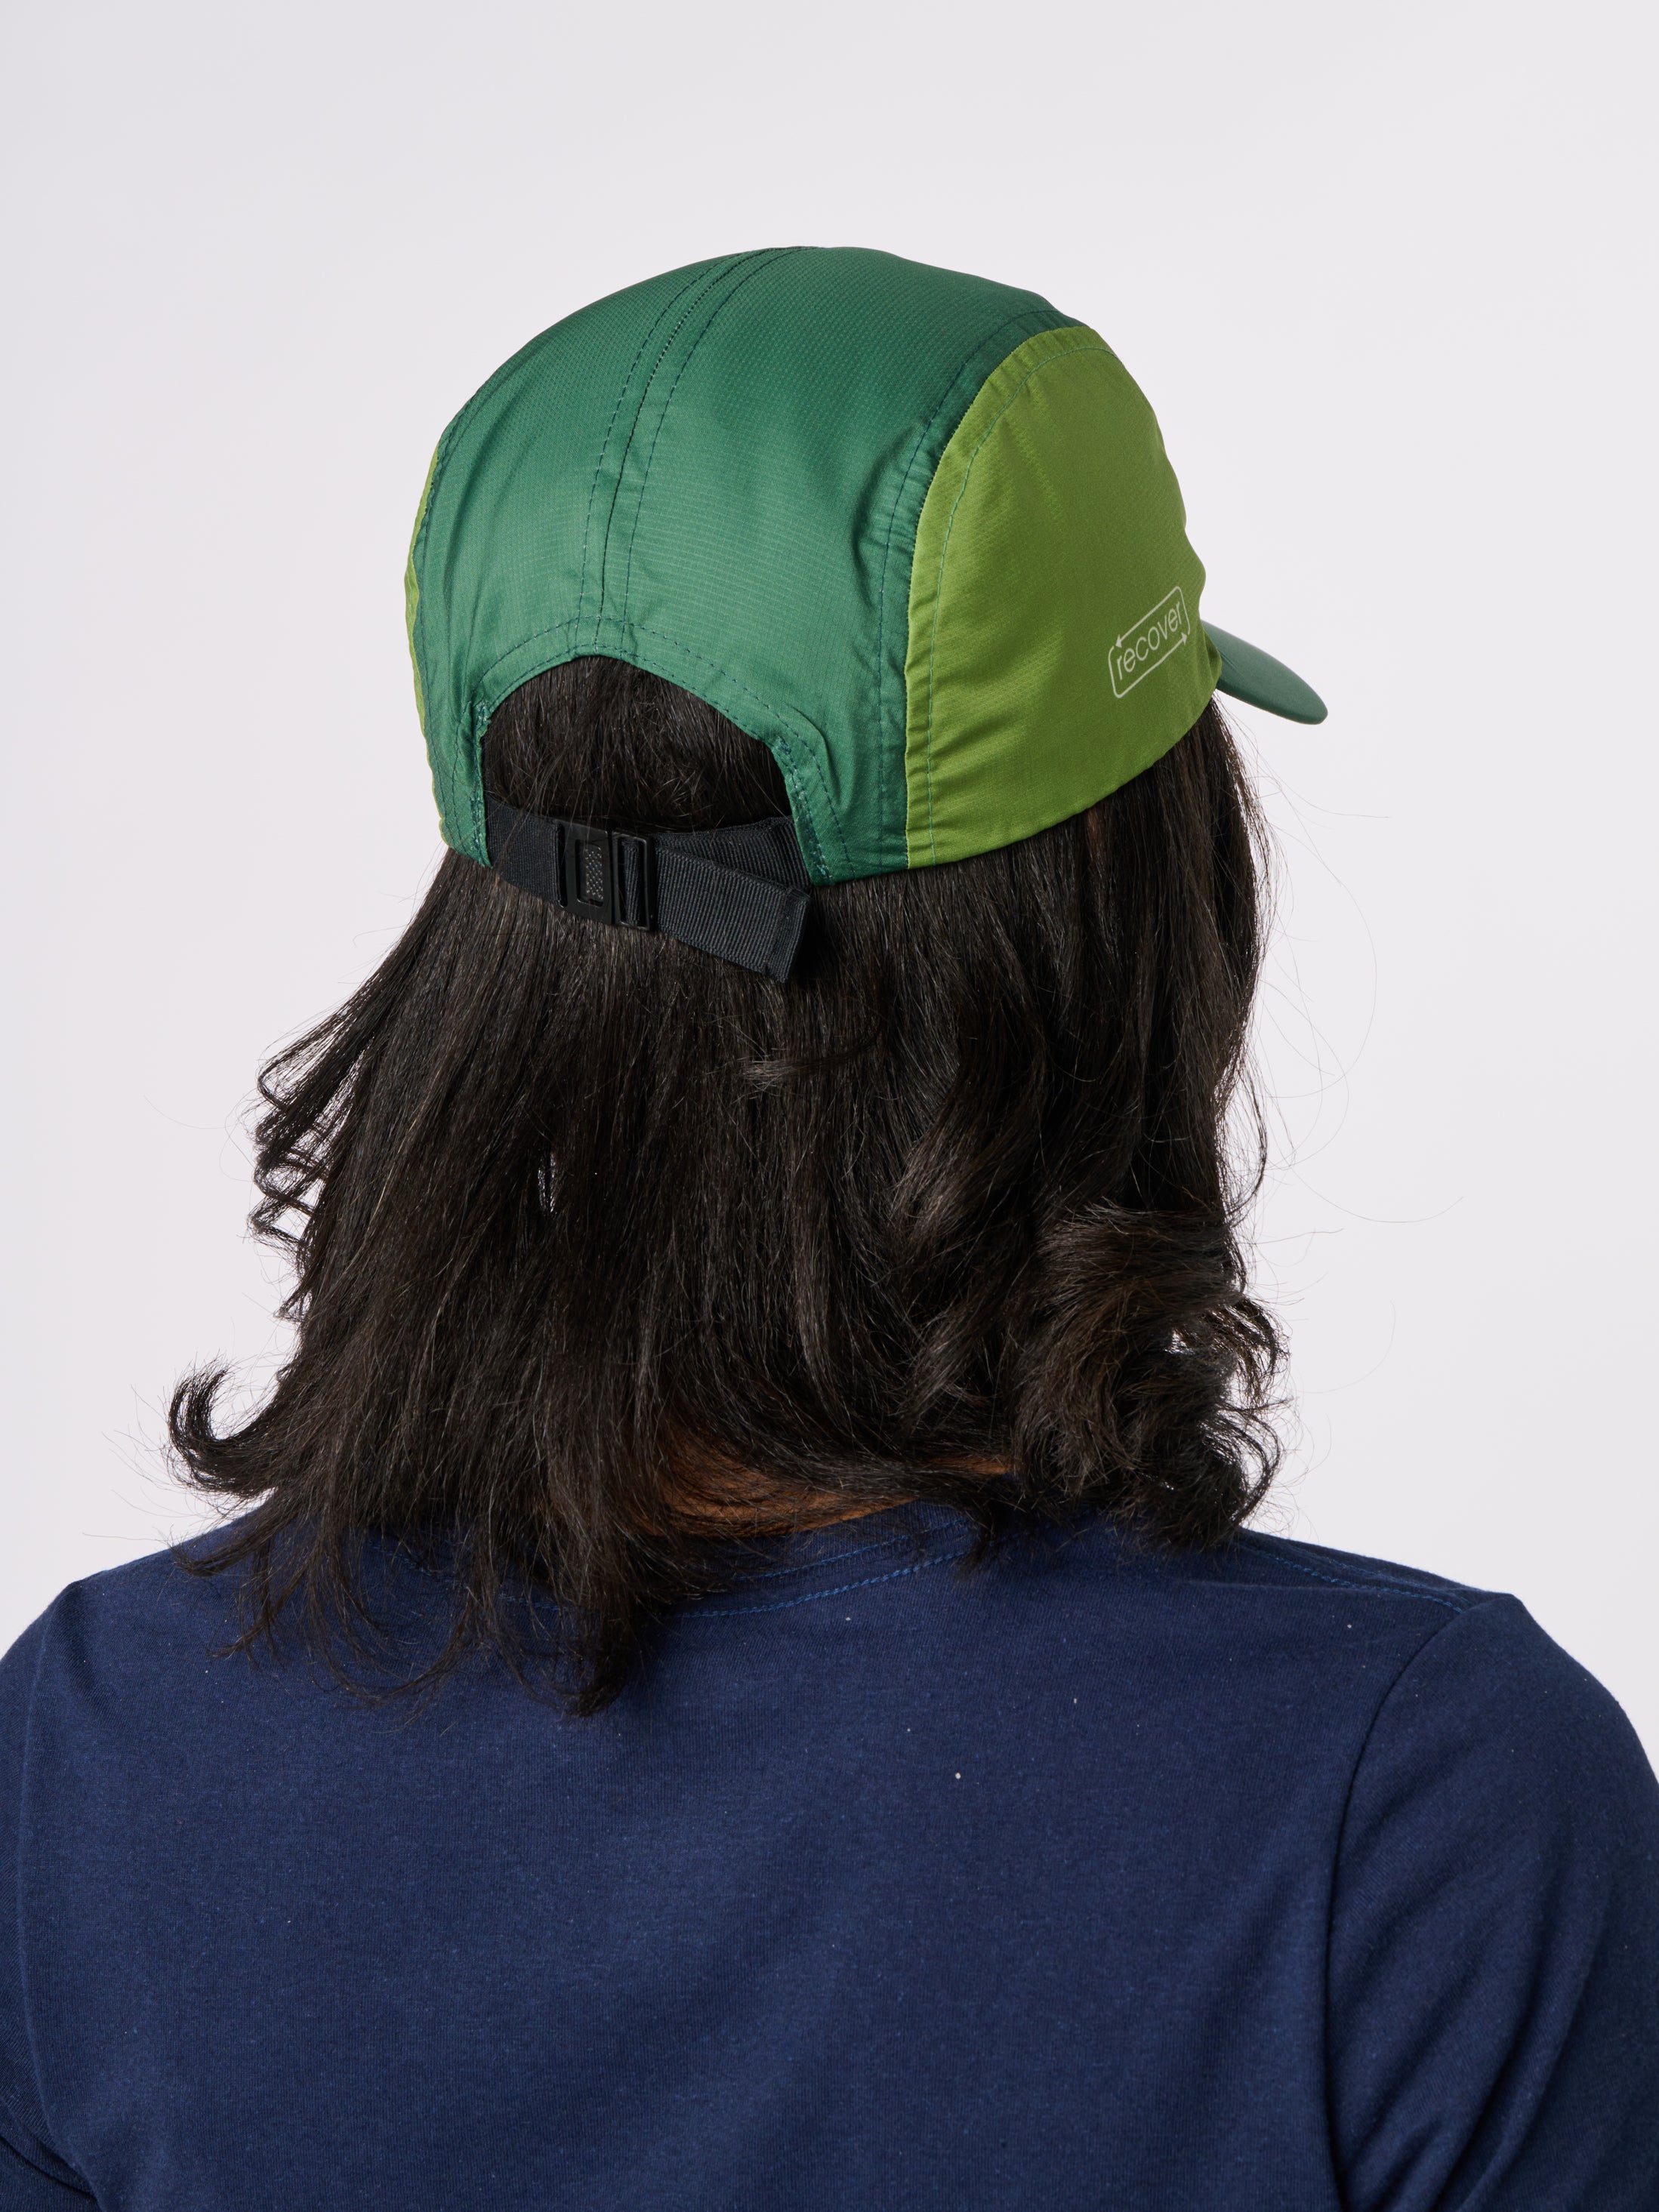 Protect Our Parks Runner Hat